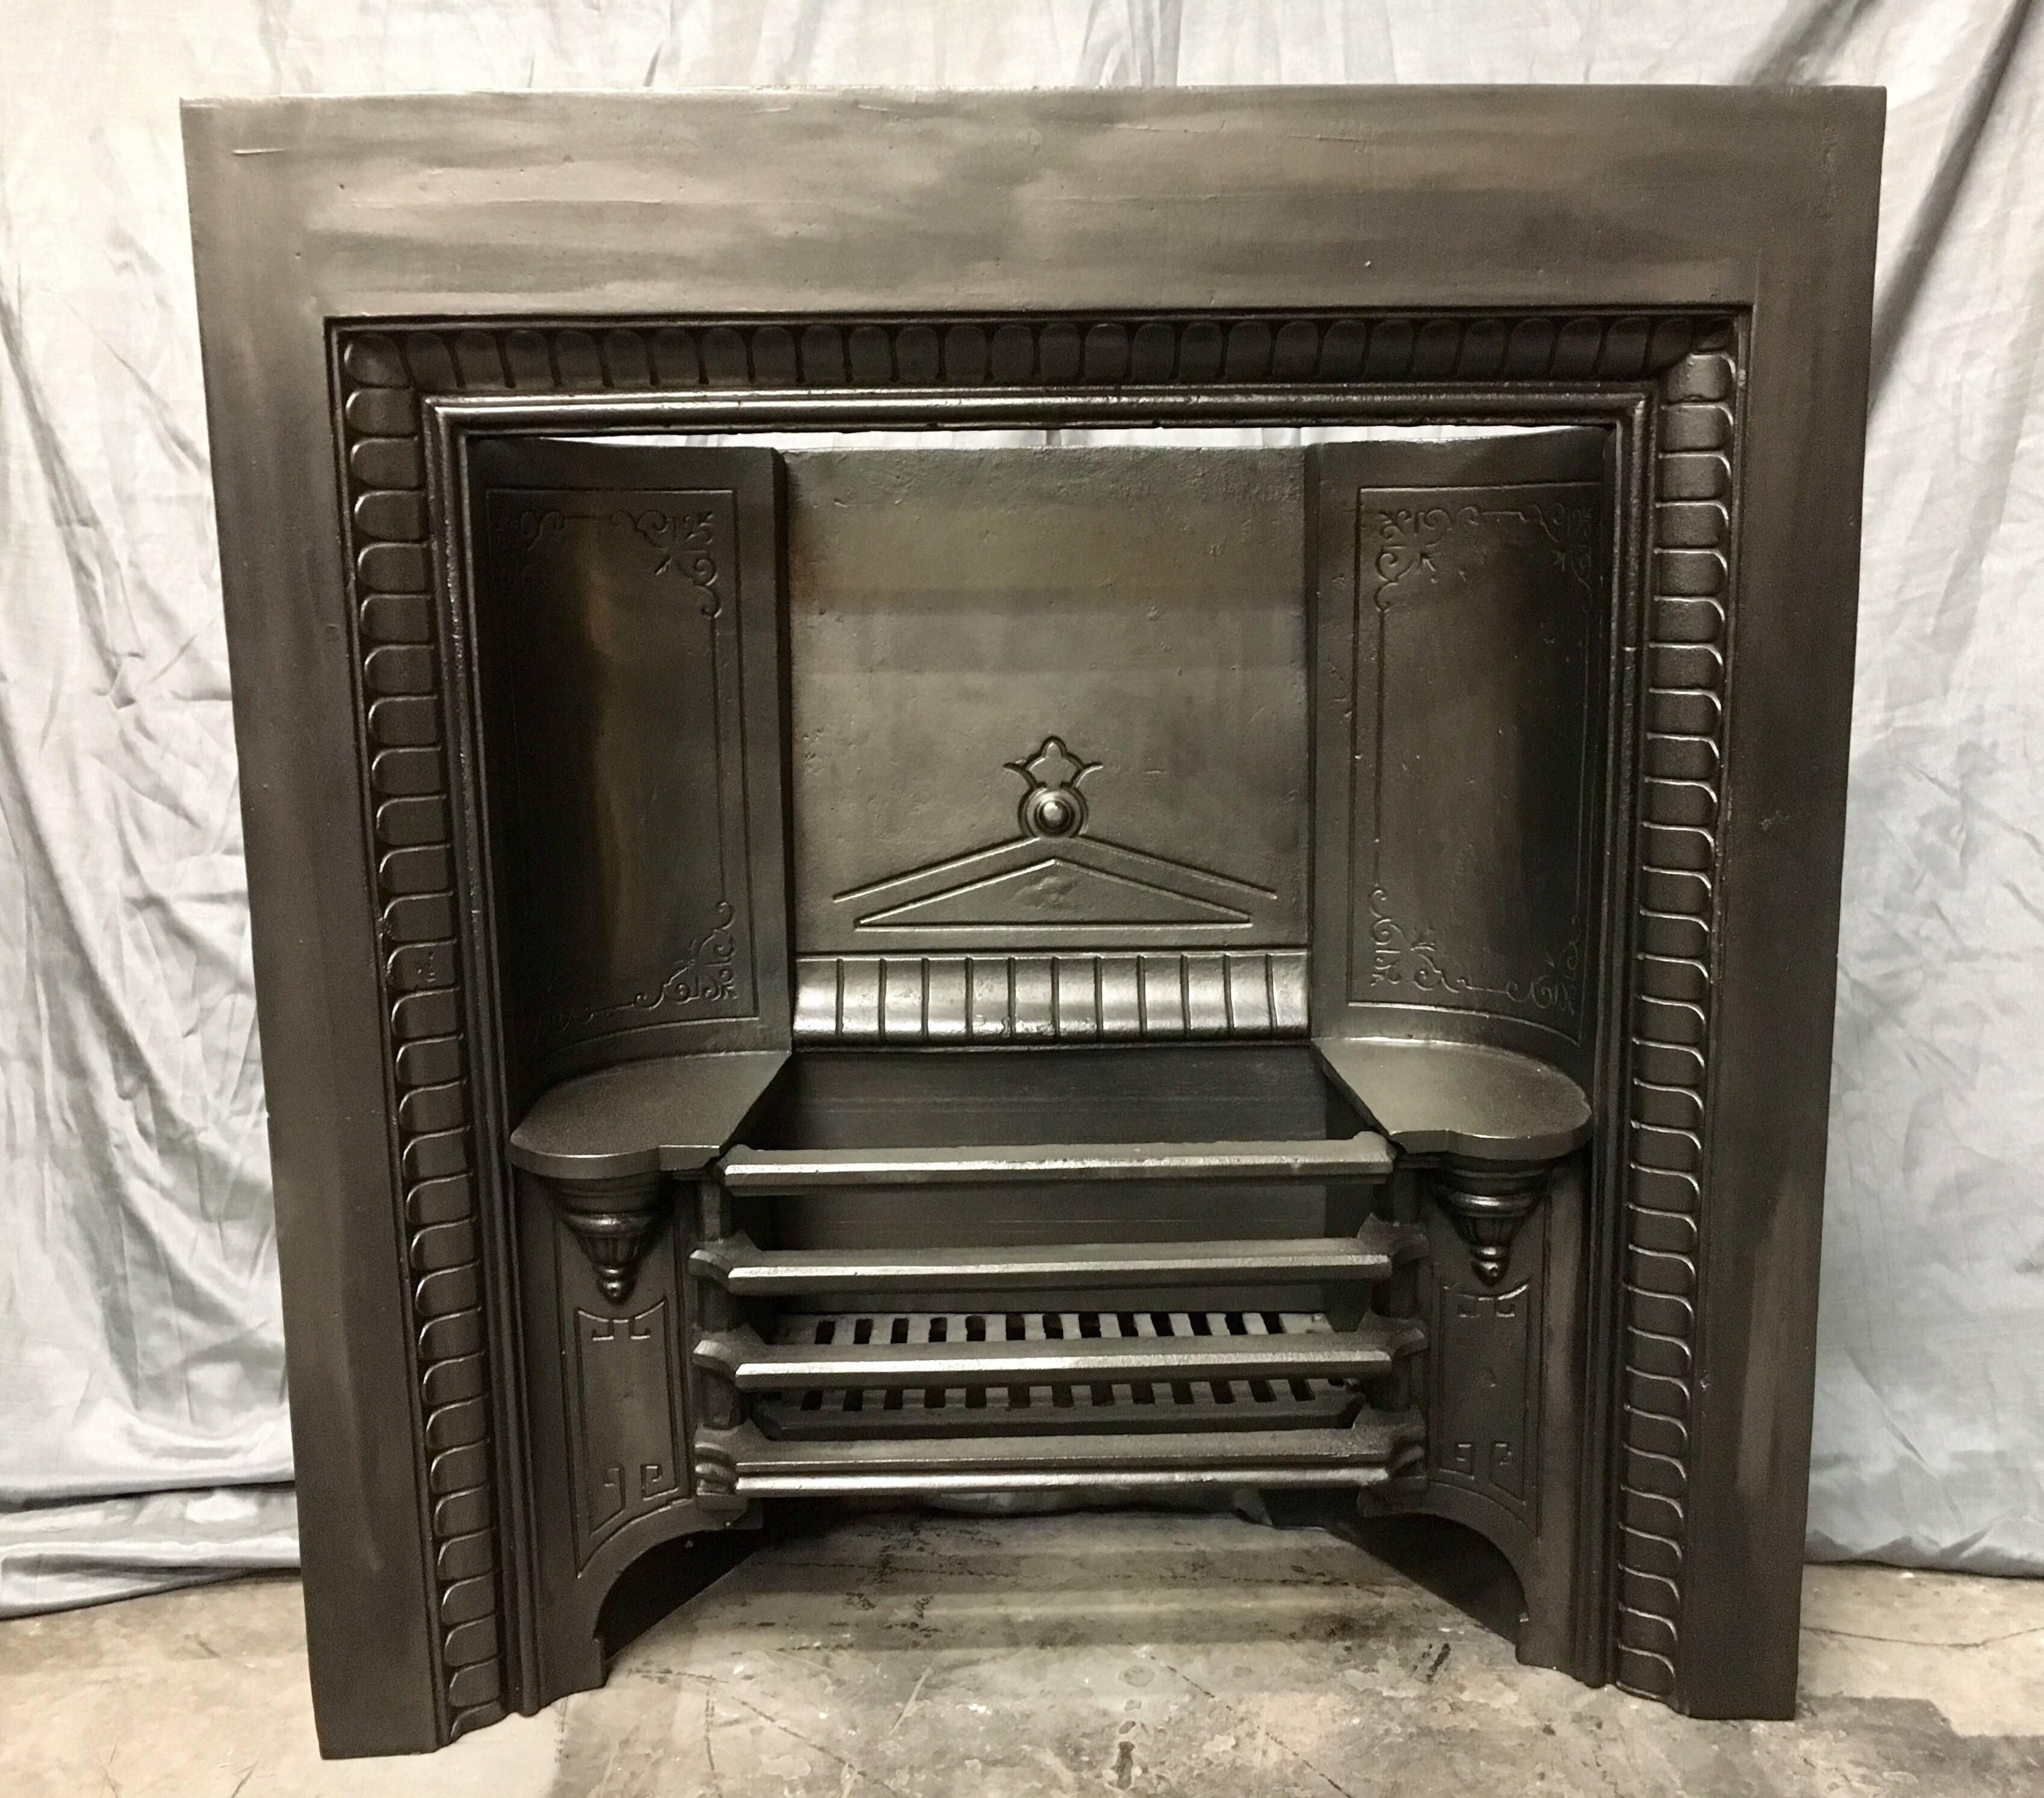 Antique Victorian 19th century hob grate fireplace insert, cast by the famous Coalbrookedale foundry. A stylized repeating leaf border with convex back panels to the back, supported by tapered turned supporting brackets- a grate of four bars sits